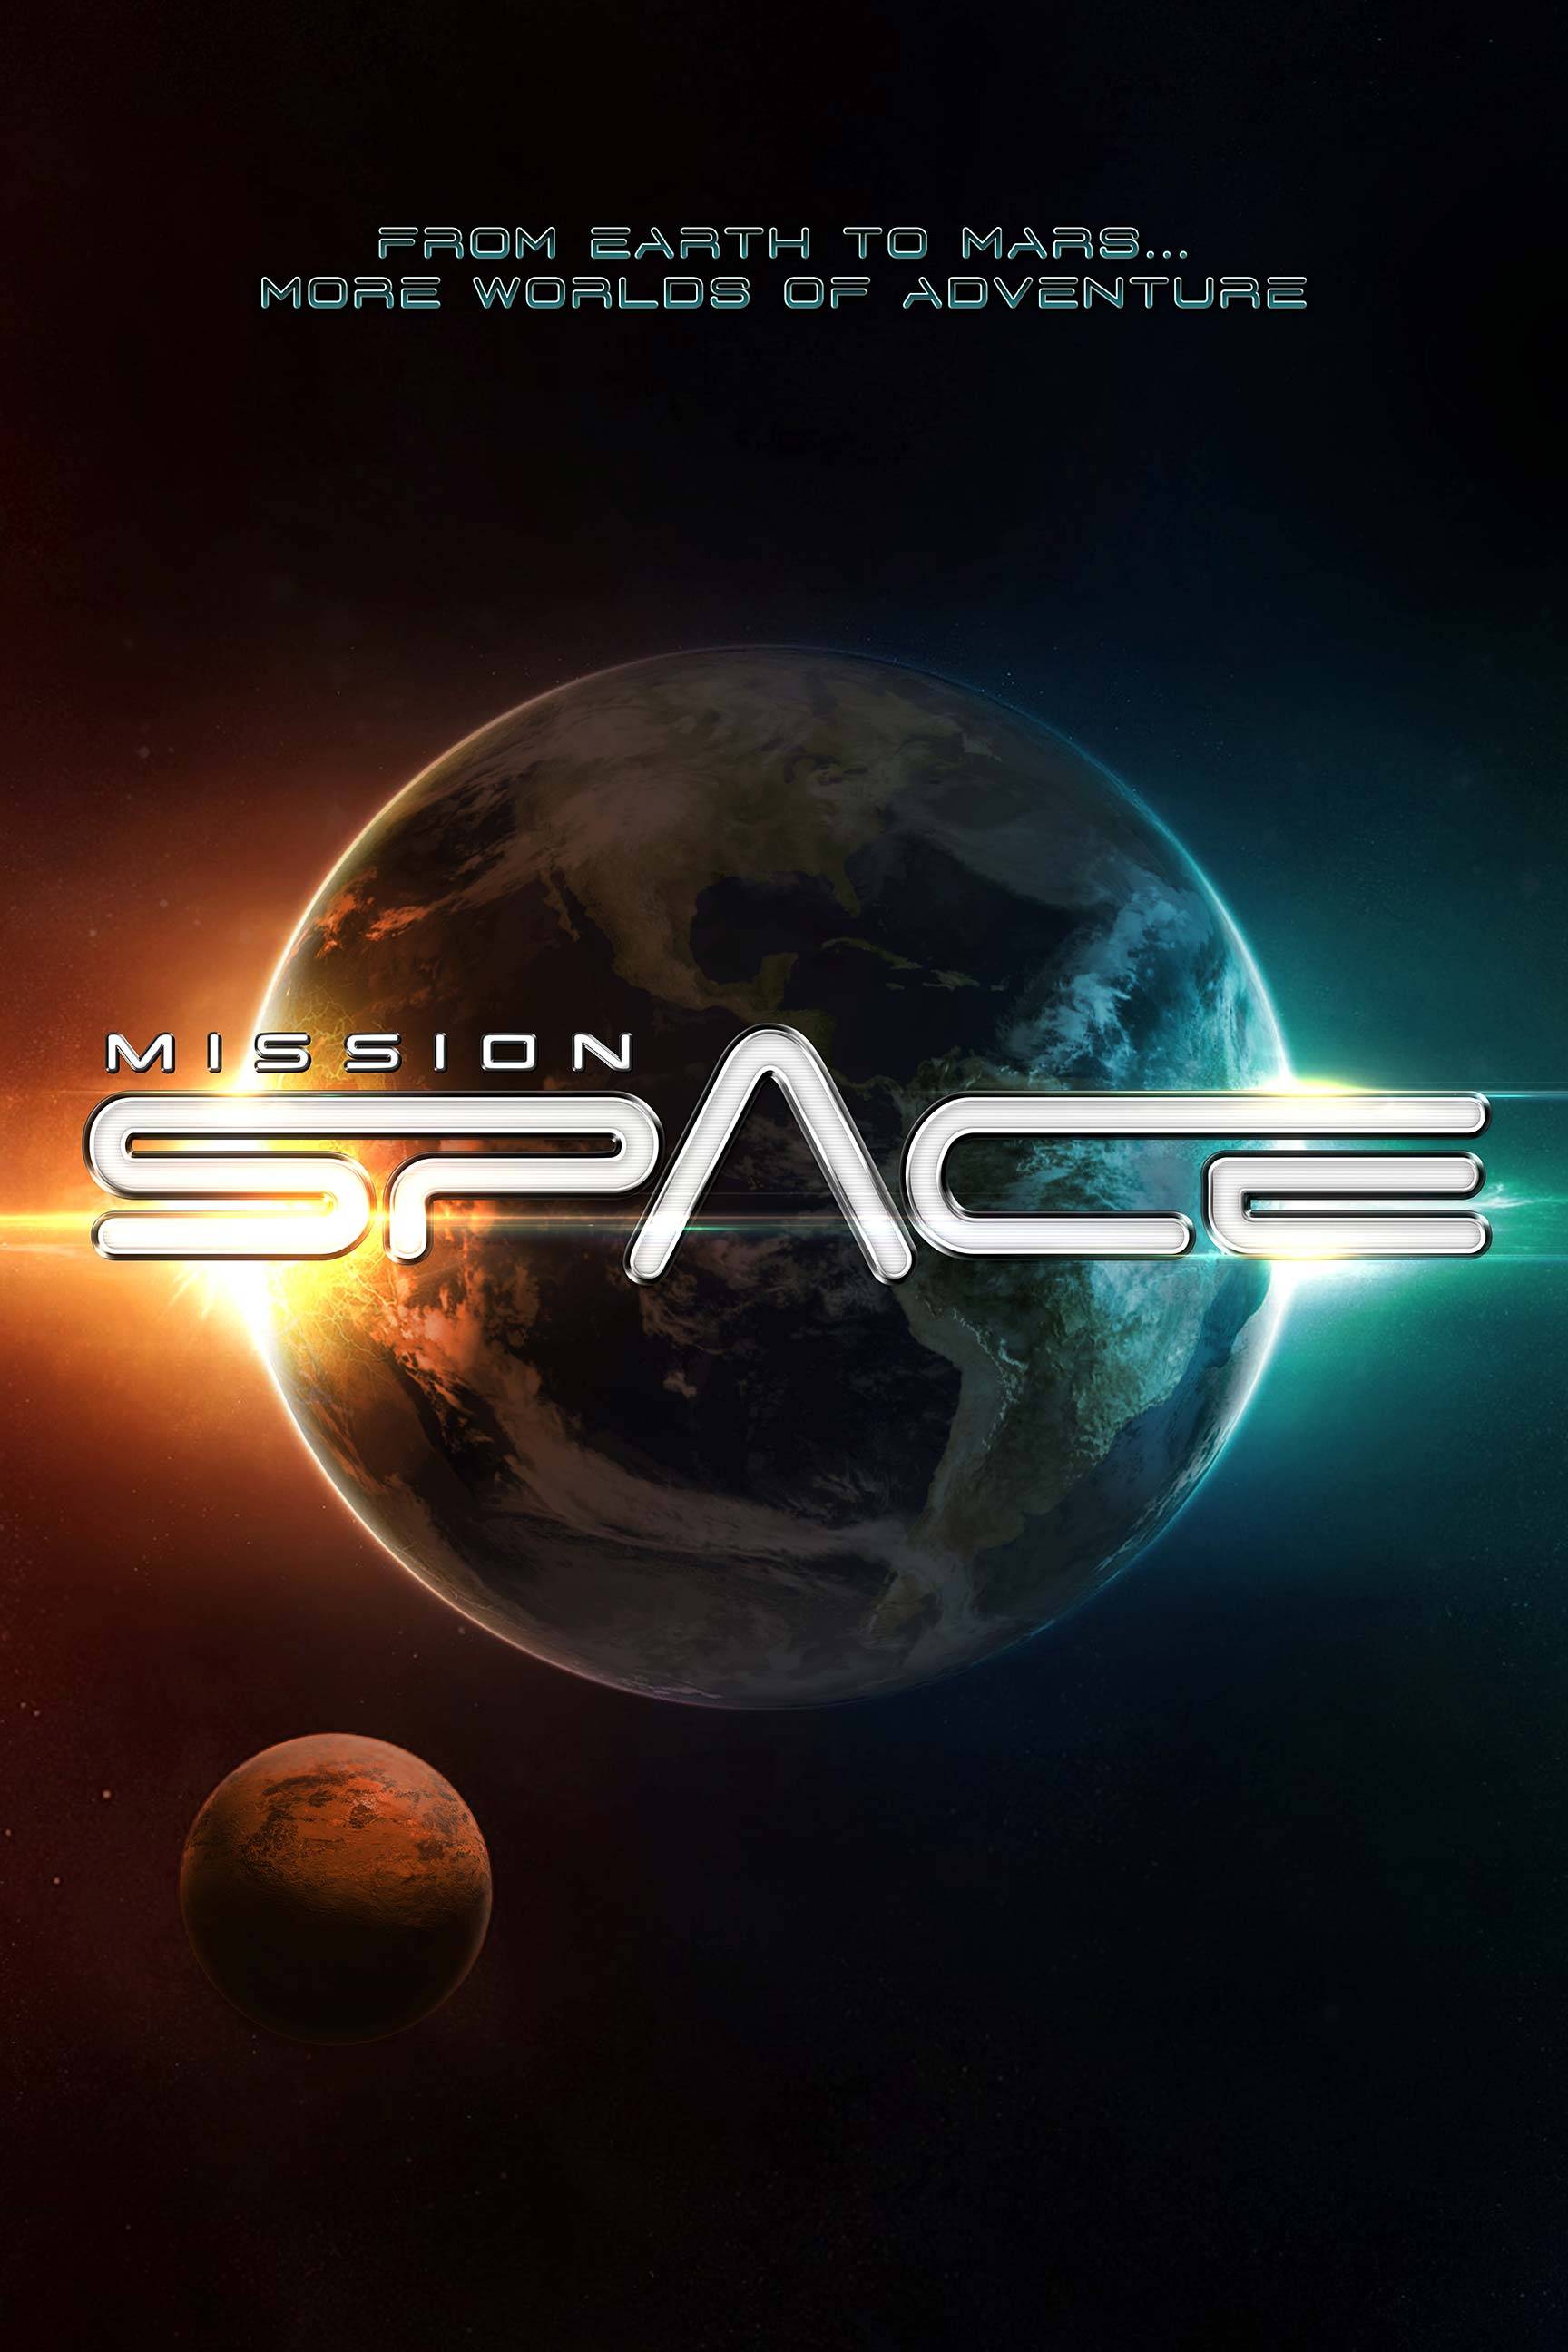 Mission SPACE alternate version opening day reports